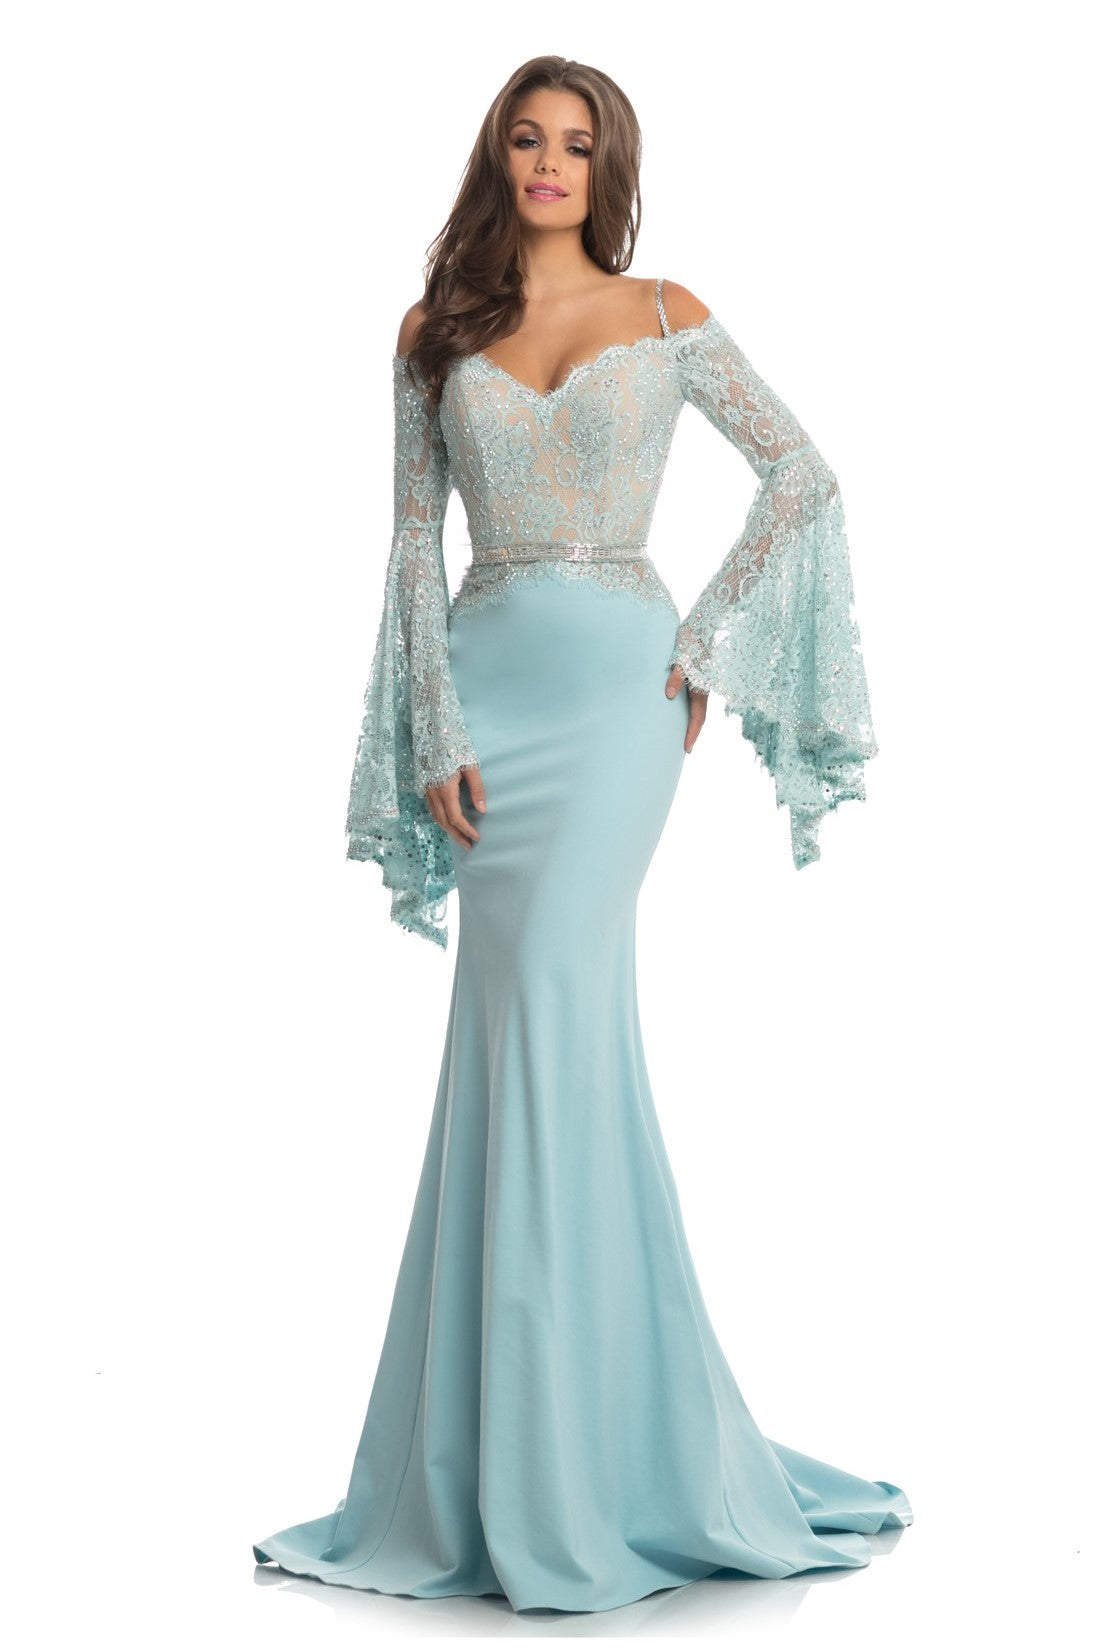 Johnathan Kayne 7244 Lace Bell Sleeve Crystal Embellished Pageant Gown Prom Dress off the shoulder Lace Crystals Glass Slipper Formals Long Gowns